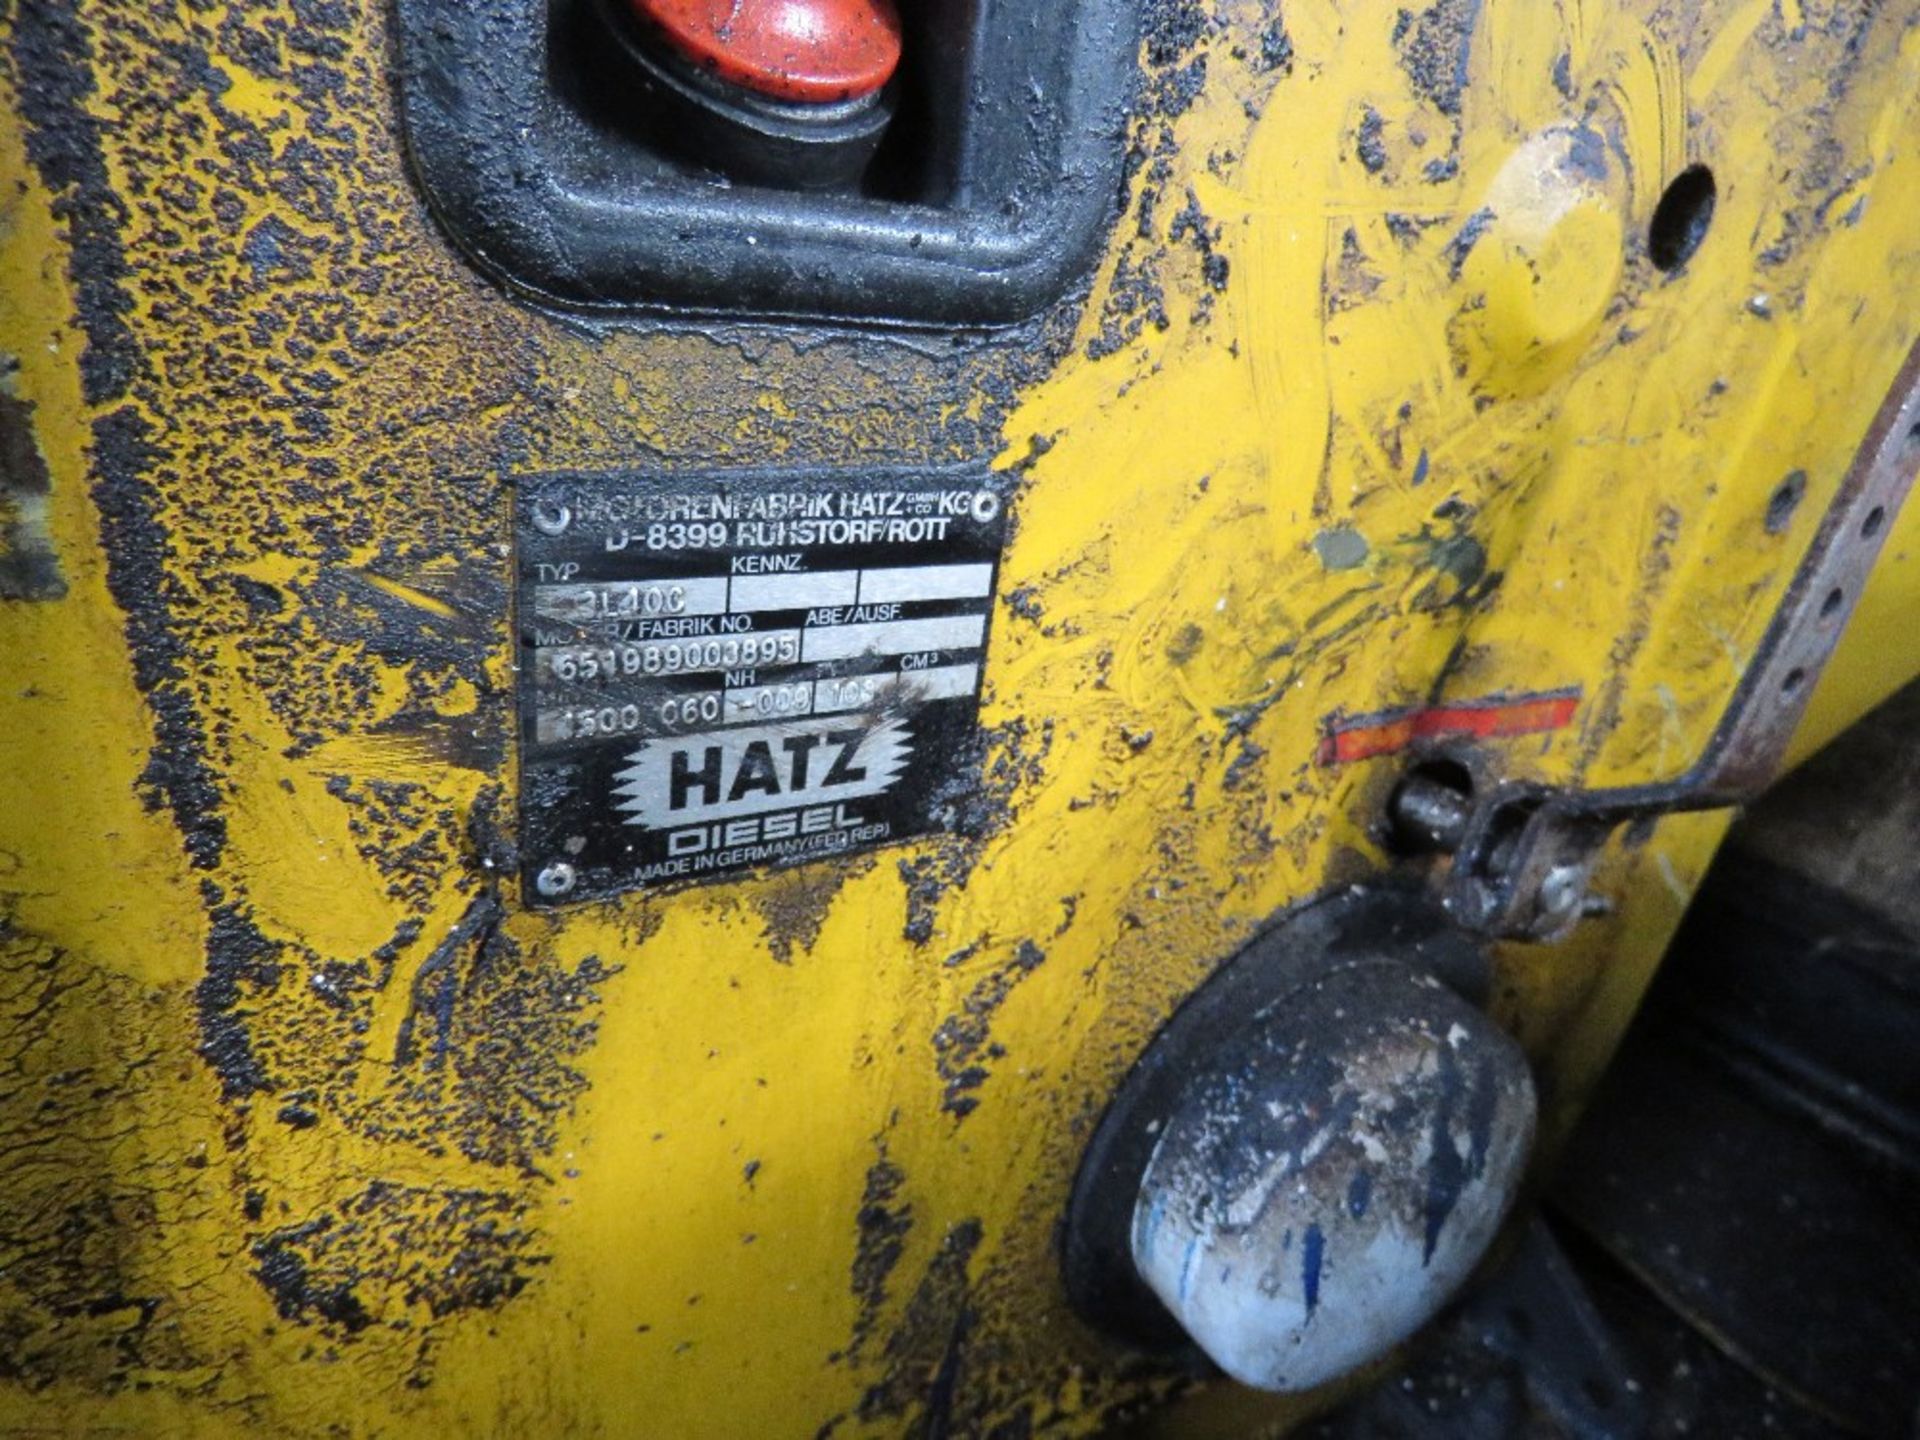 HATZ DIESEL ENGINED 20KVA TOWED GENERATOR SET, LEROY SOMER BACKEND FITTED. SOURCED FROM FARM CLOSURE - Image 11 of 14